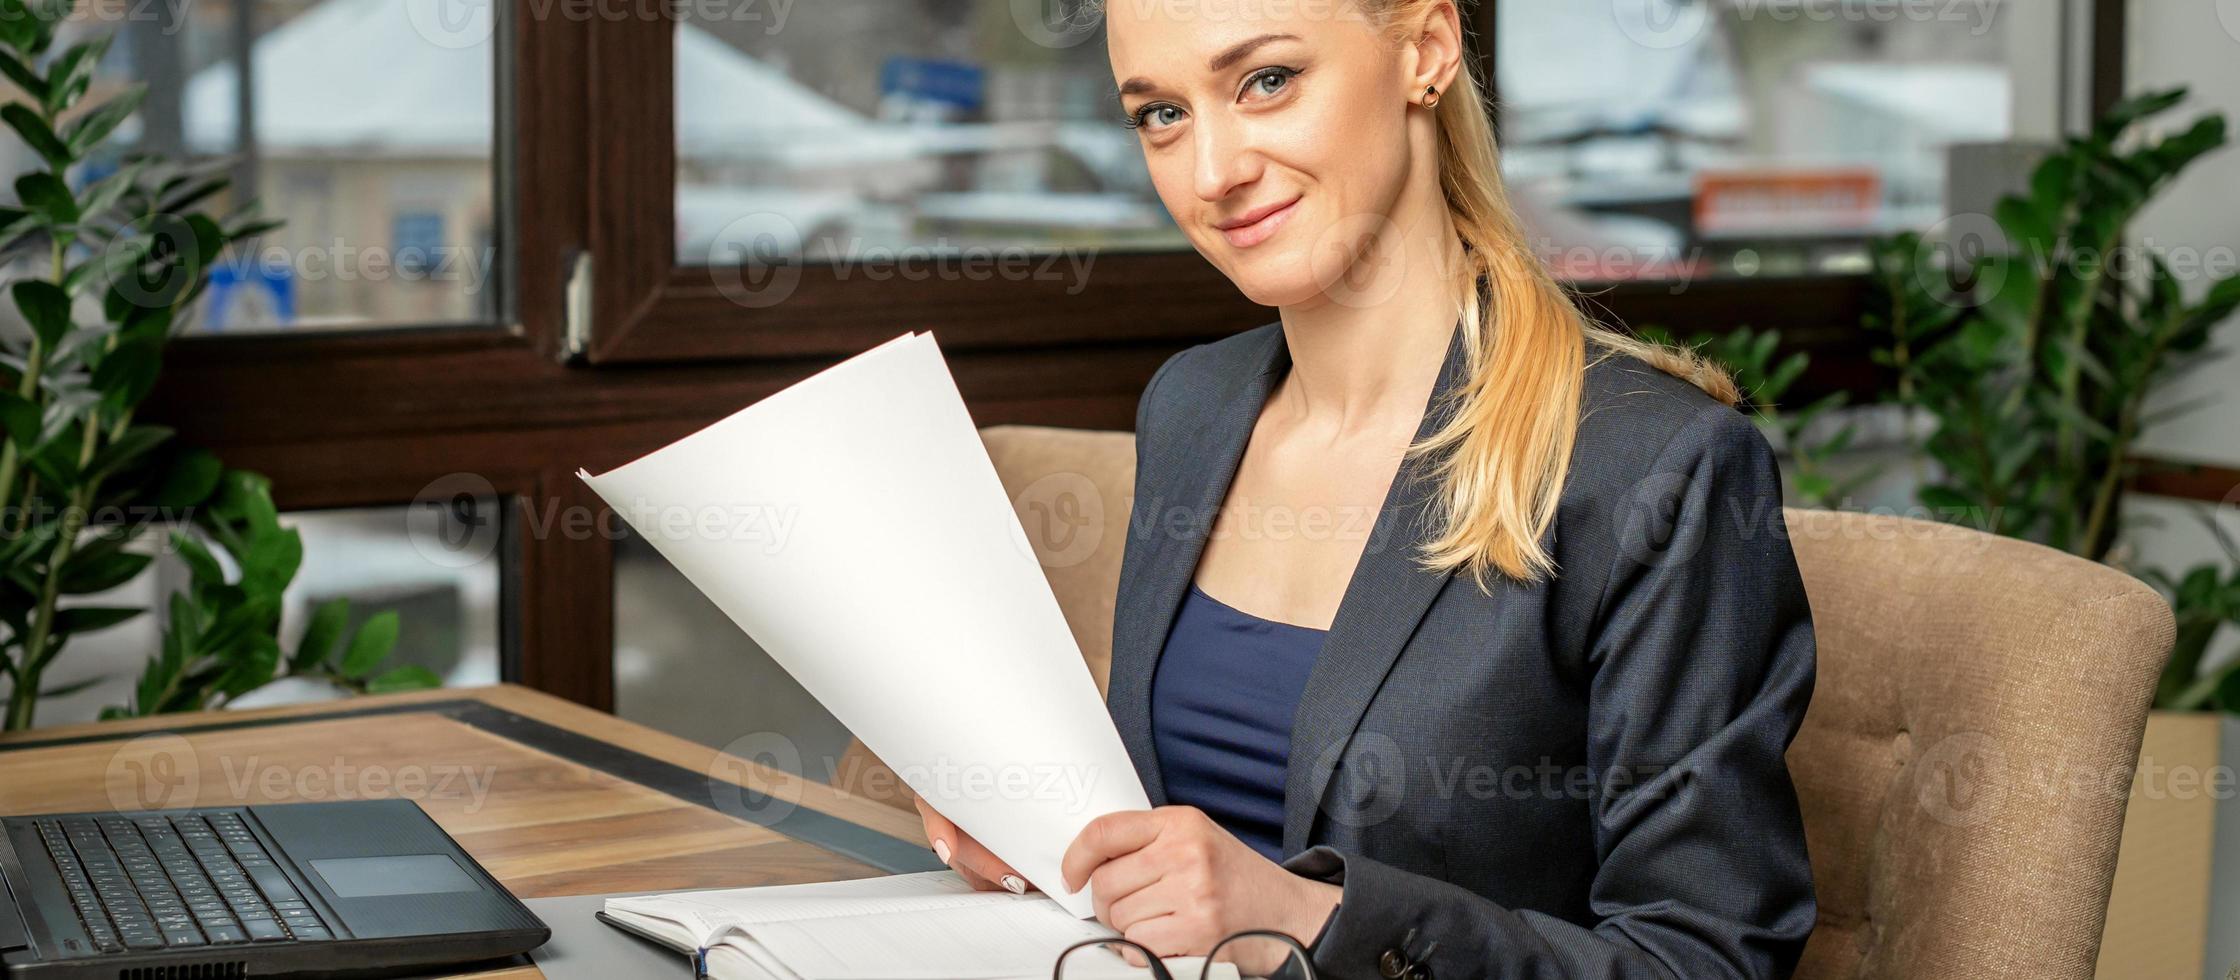 Portrait of a young businesswoman photo